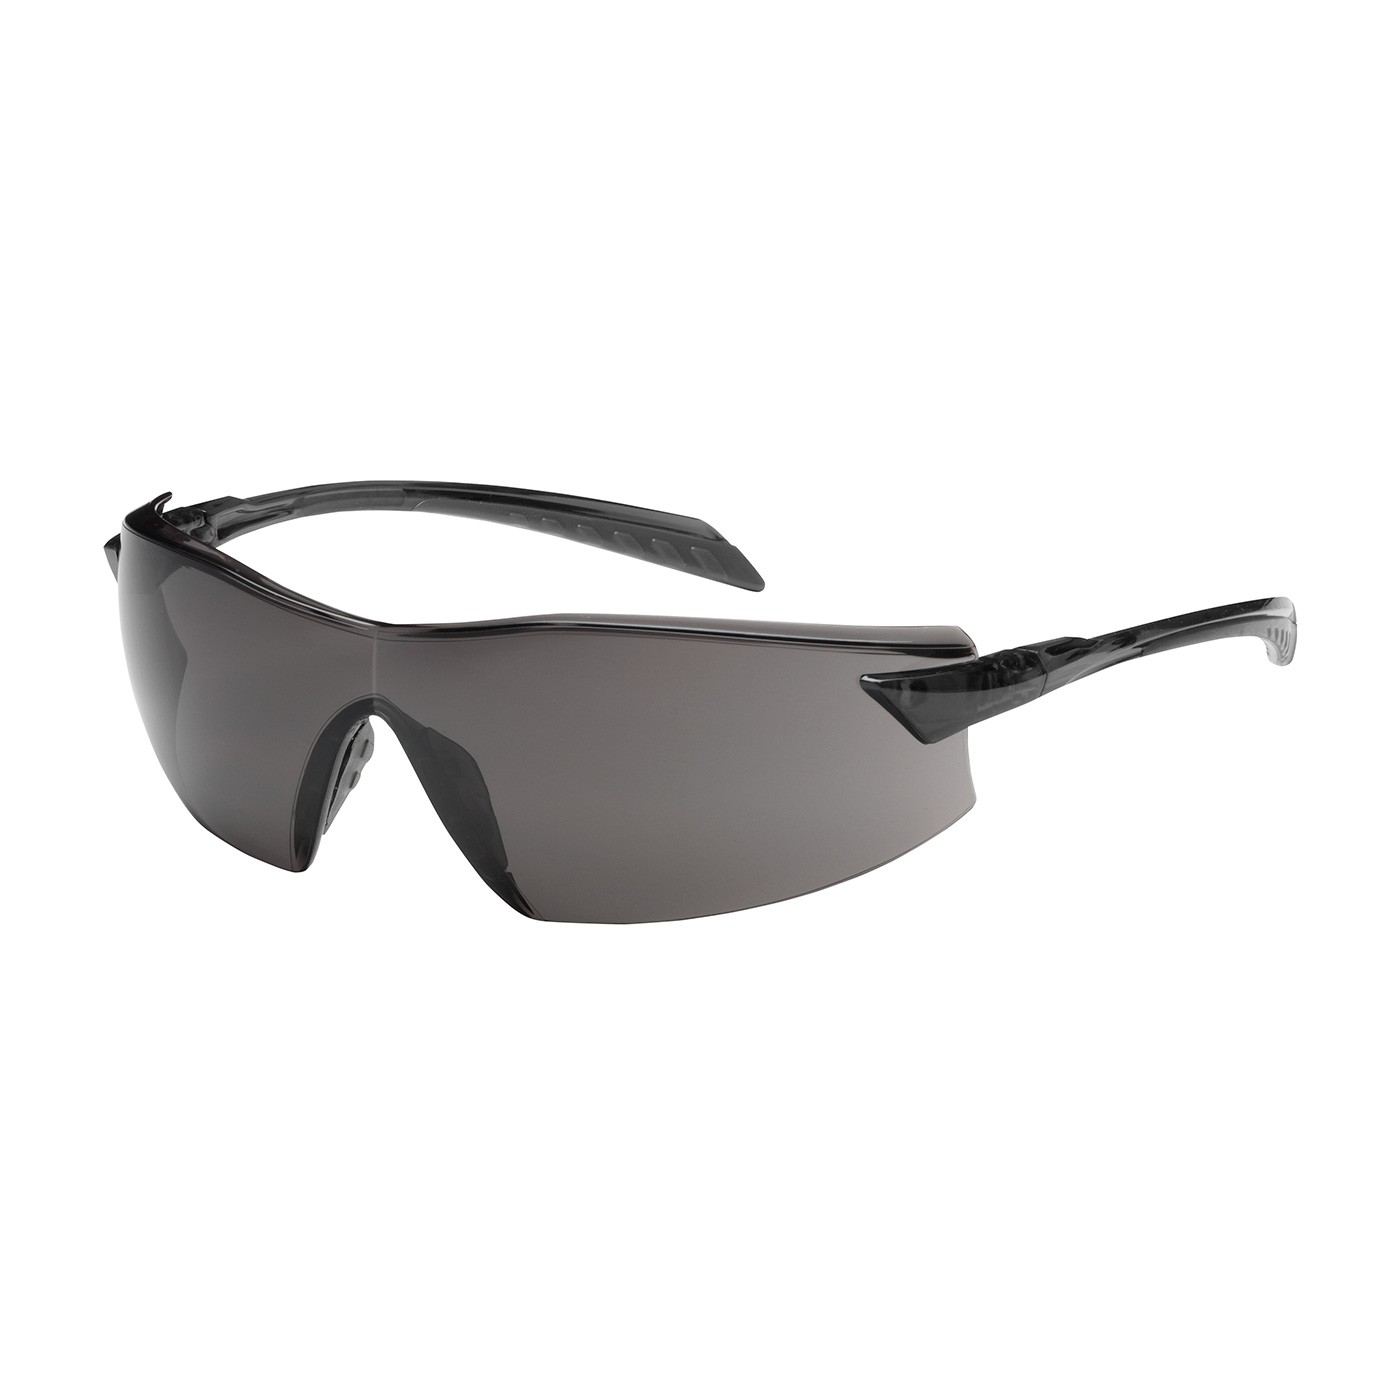  Radar™ Rimless Safety Glasses with Gray Temple, Gray Lens and Anti-Scratch / Anti-Fog Coating  (#250-45-0021)